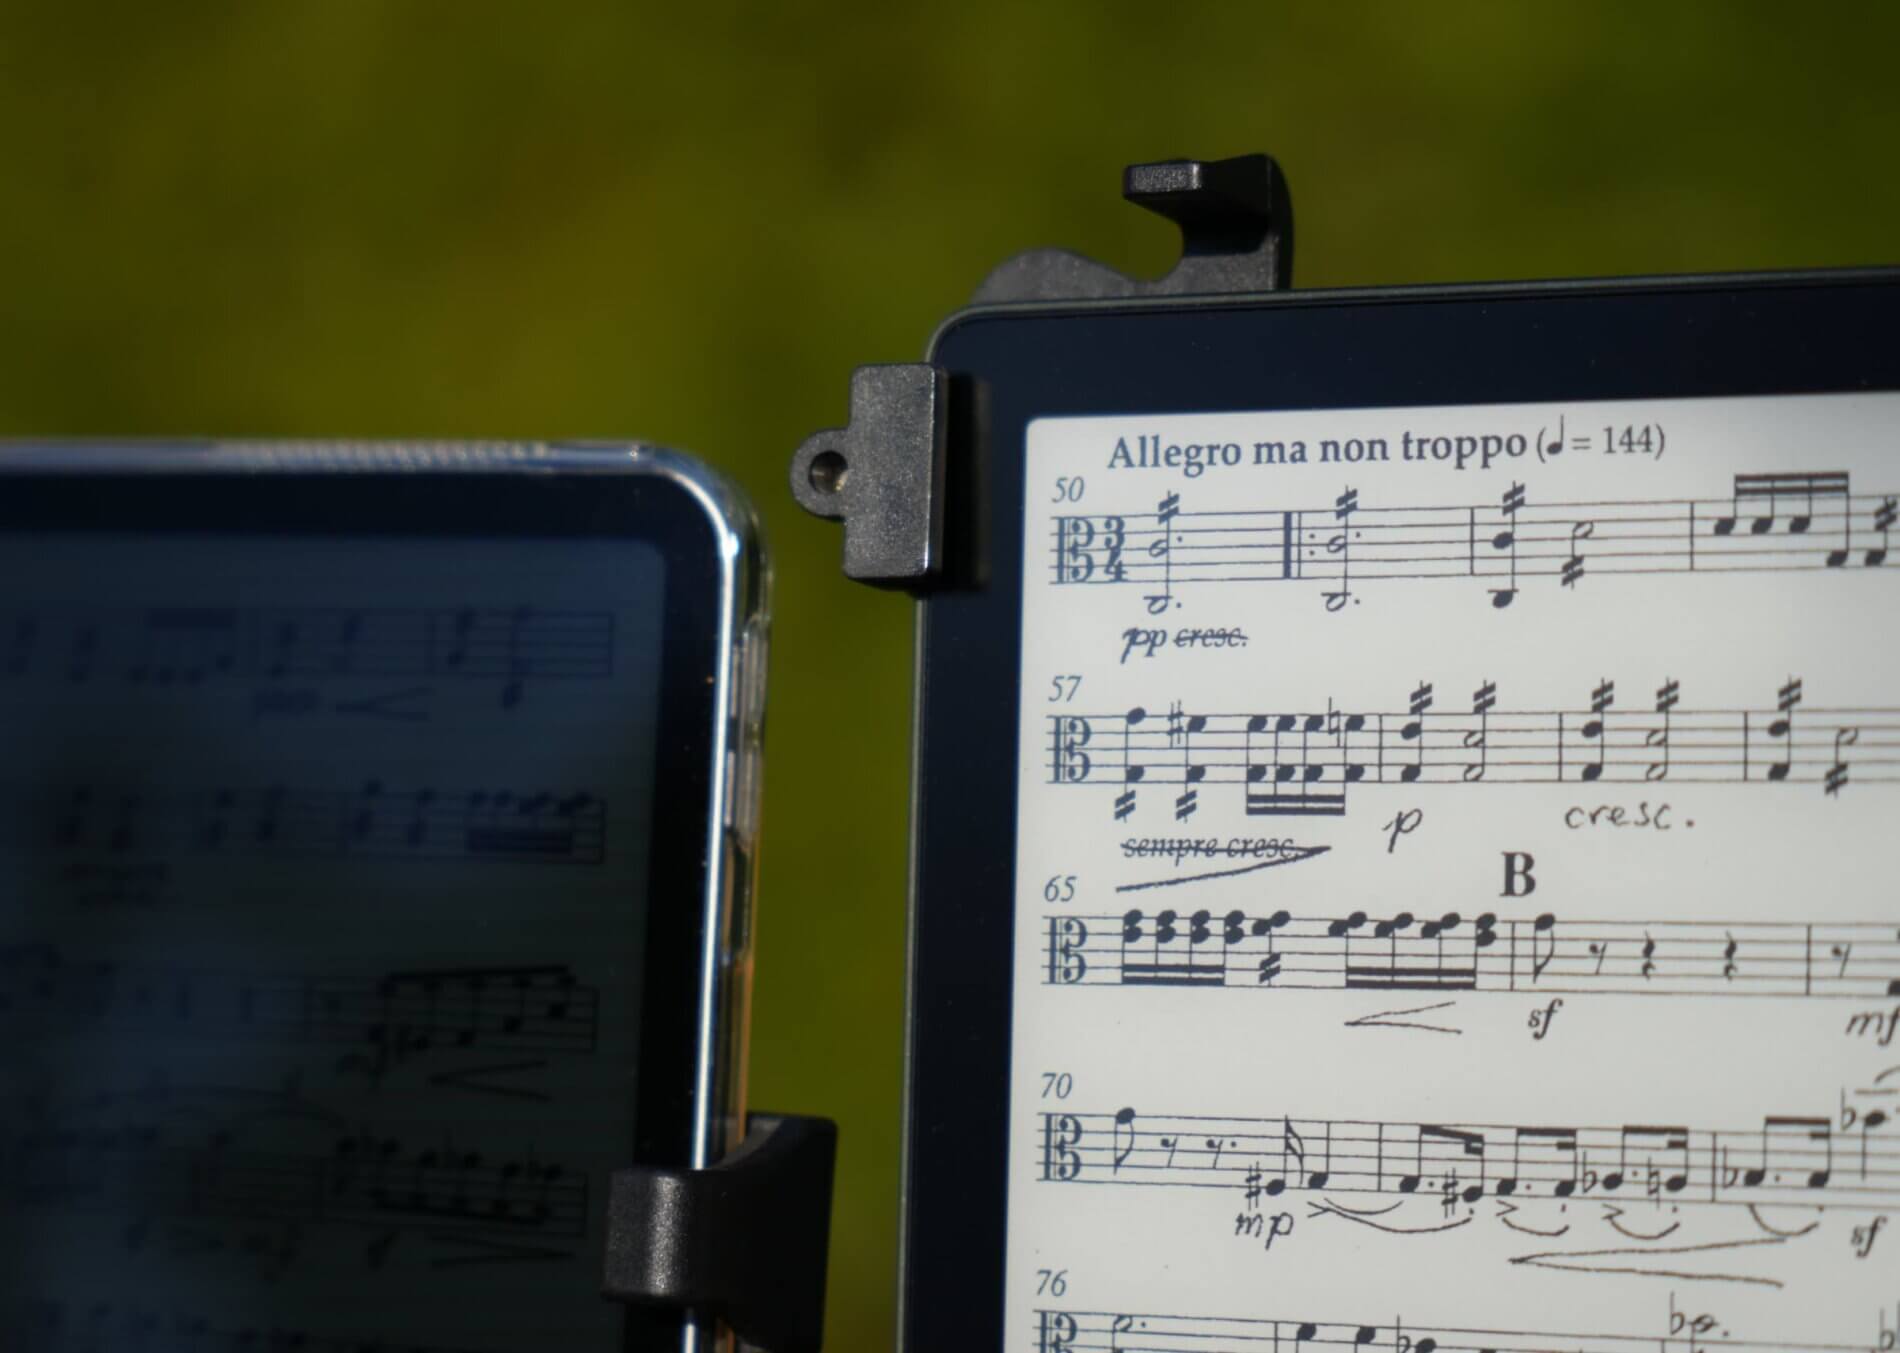 An e-book-reader and a tablet (iPad) displaying music scores in direct sunlight